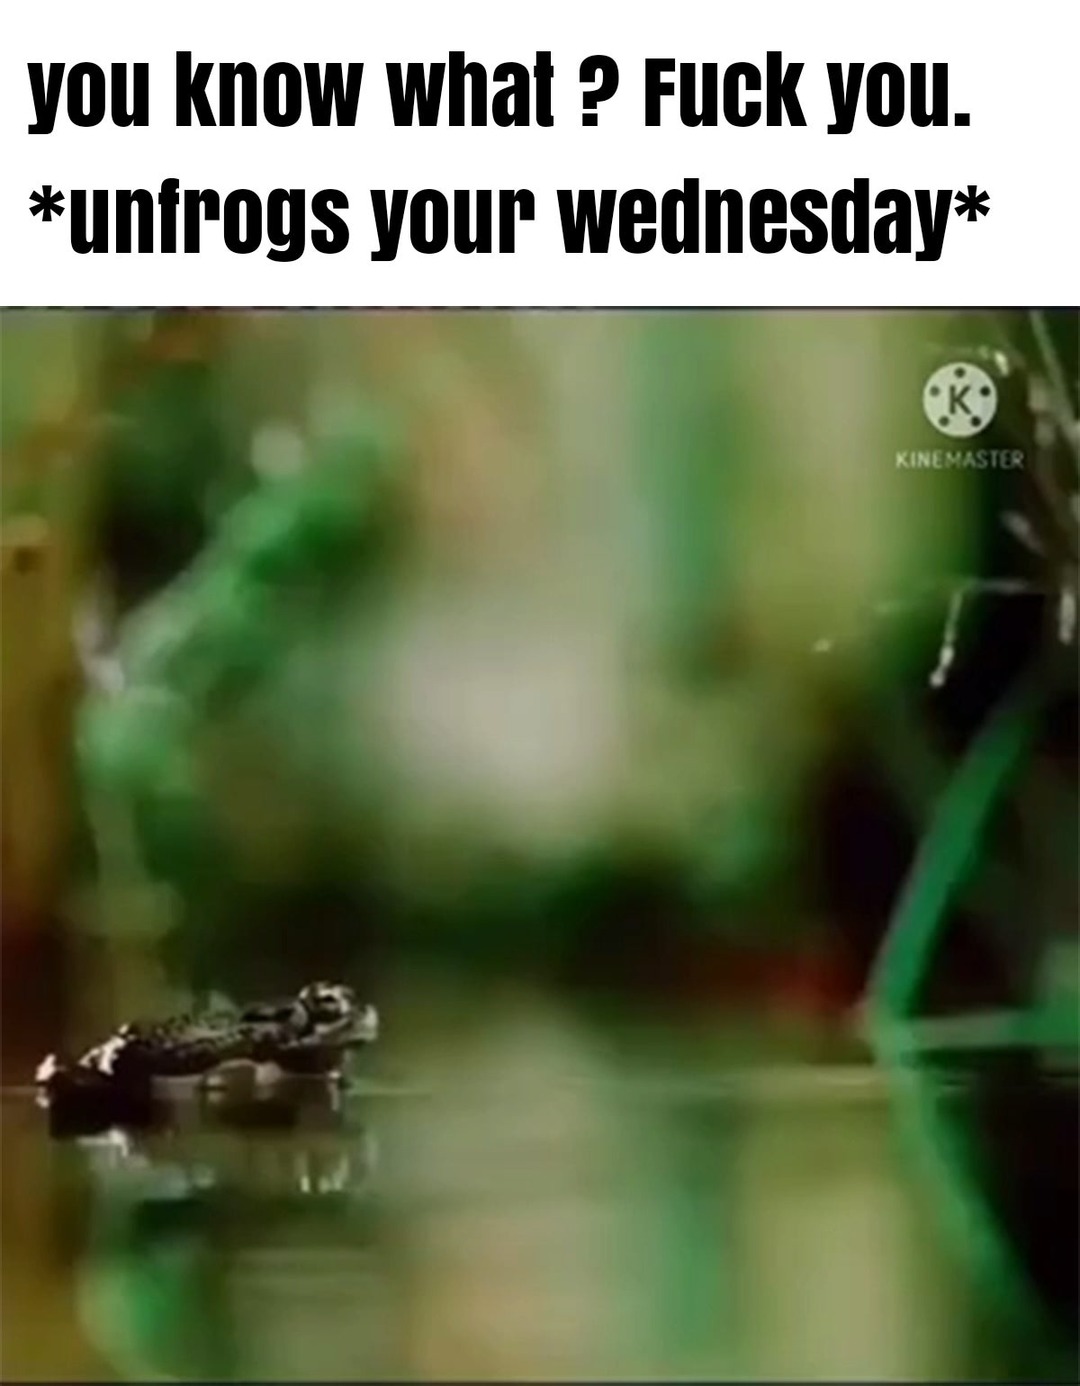 Unfrogs your Wednesday - meme